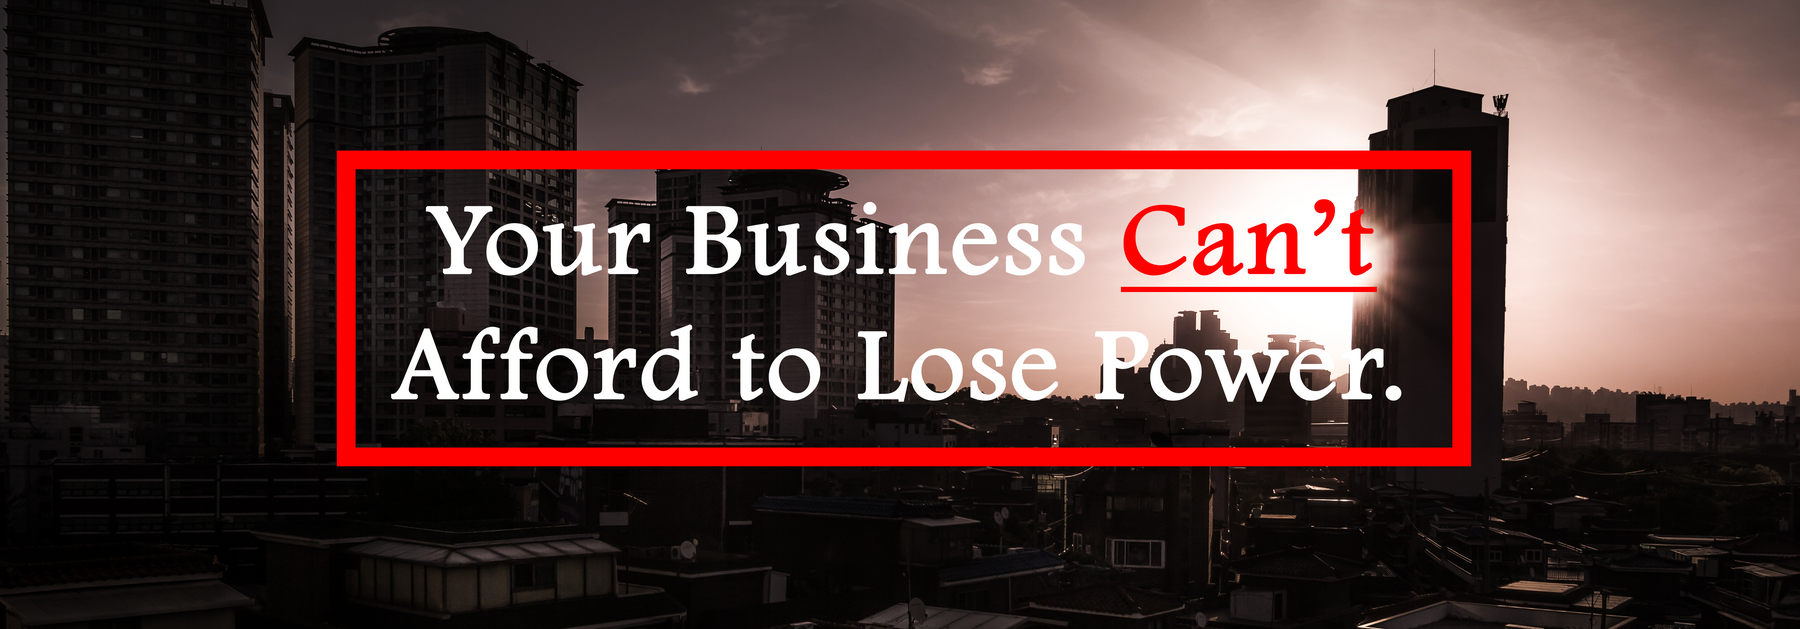 Your Business Can’t Afford to Lose Power